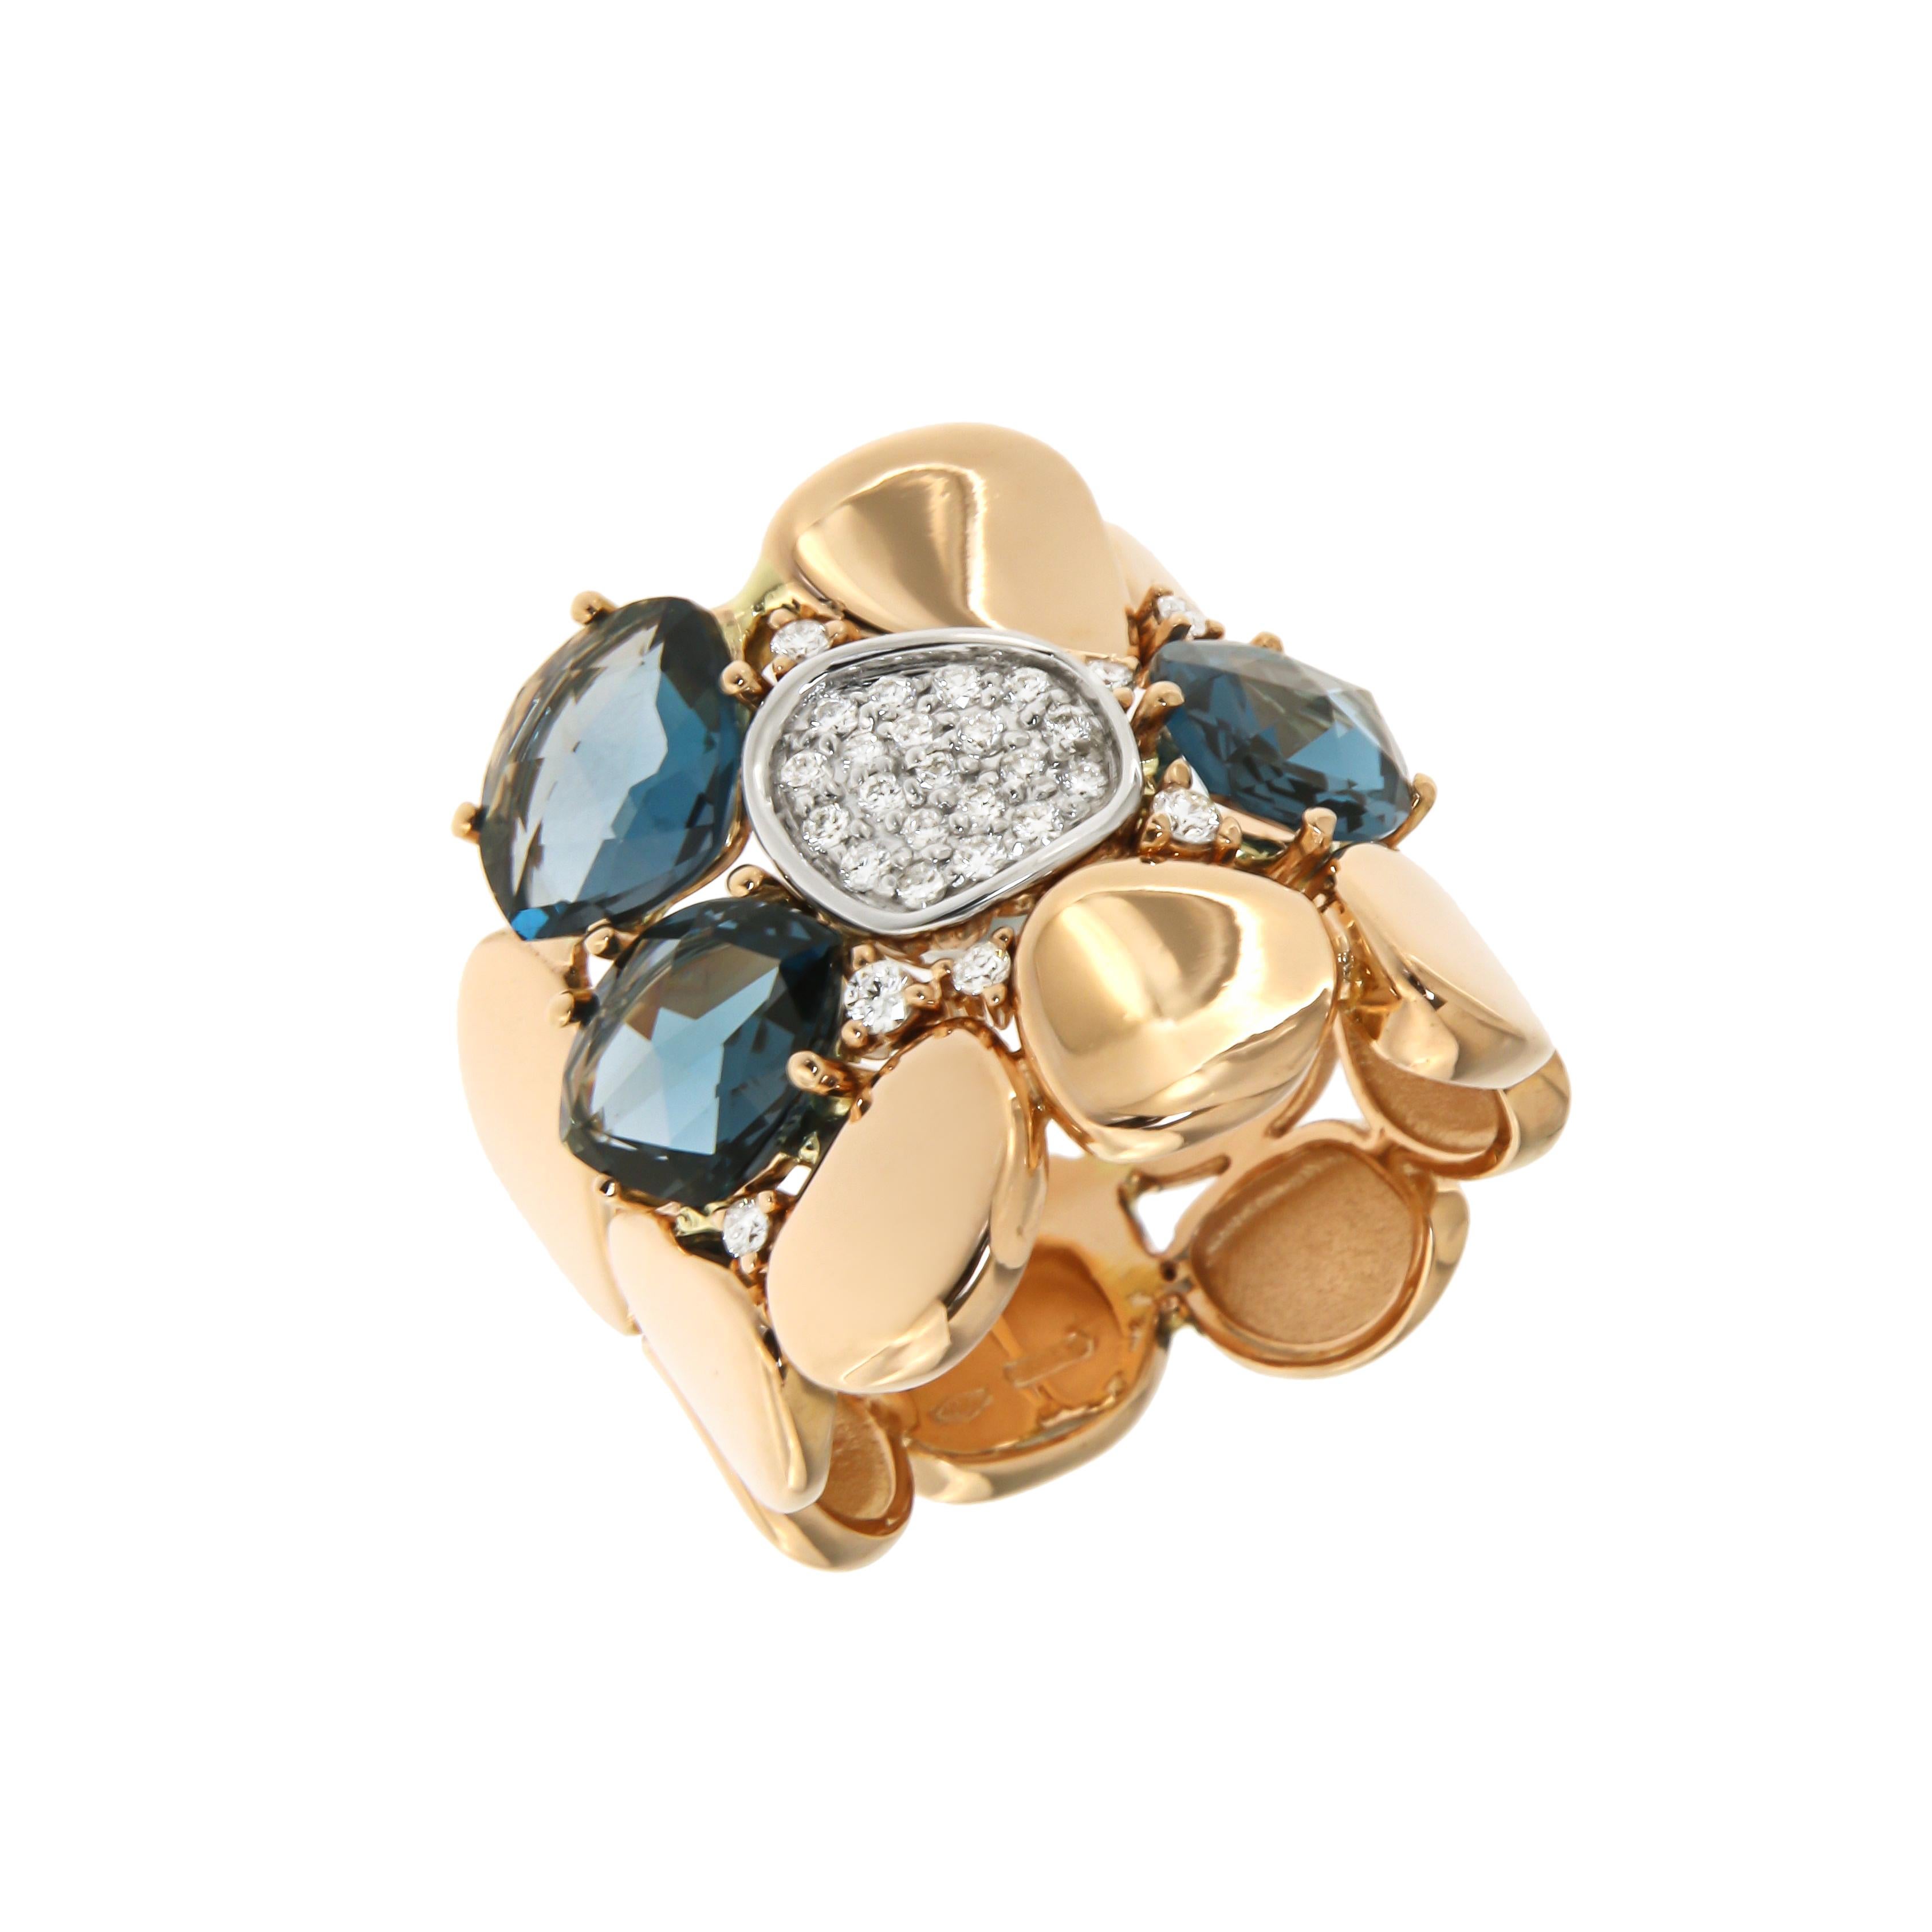 Ring Rose Gold 18 K (Same Style Smaller Model Available)
Diamond 0,21 ct
London Blue Topaz 

Weight 10.8 grams
Different Sizes Available

With a heritage of ancient fine Swiss jewelry traditions, NATKINA is a Geneva based jewellery brand, which